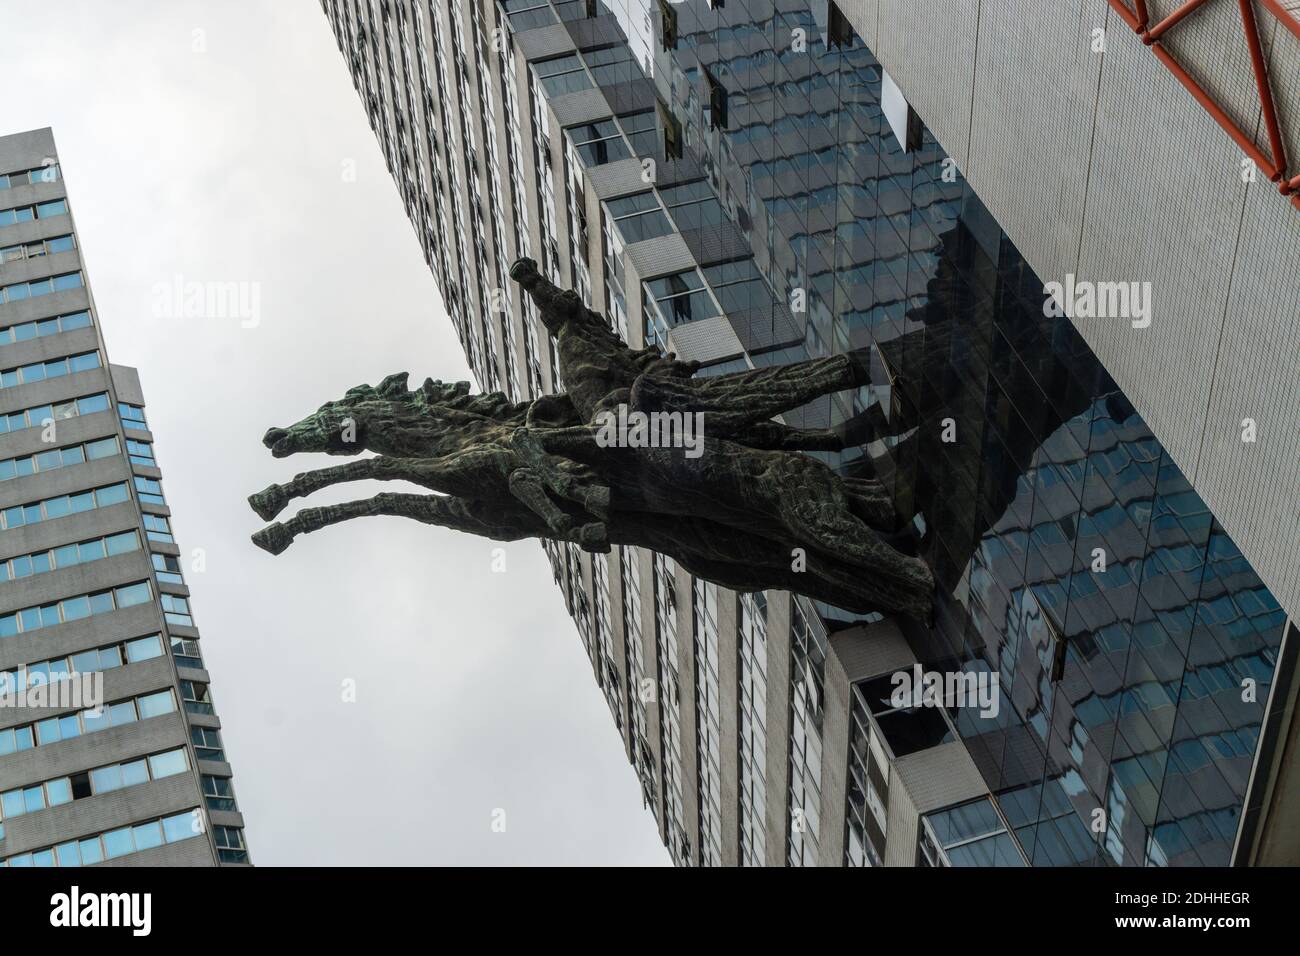 Surreal urban sculpture on side of modern city building in China Stock Photo